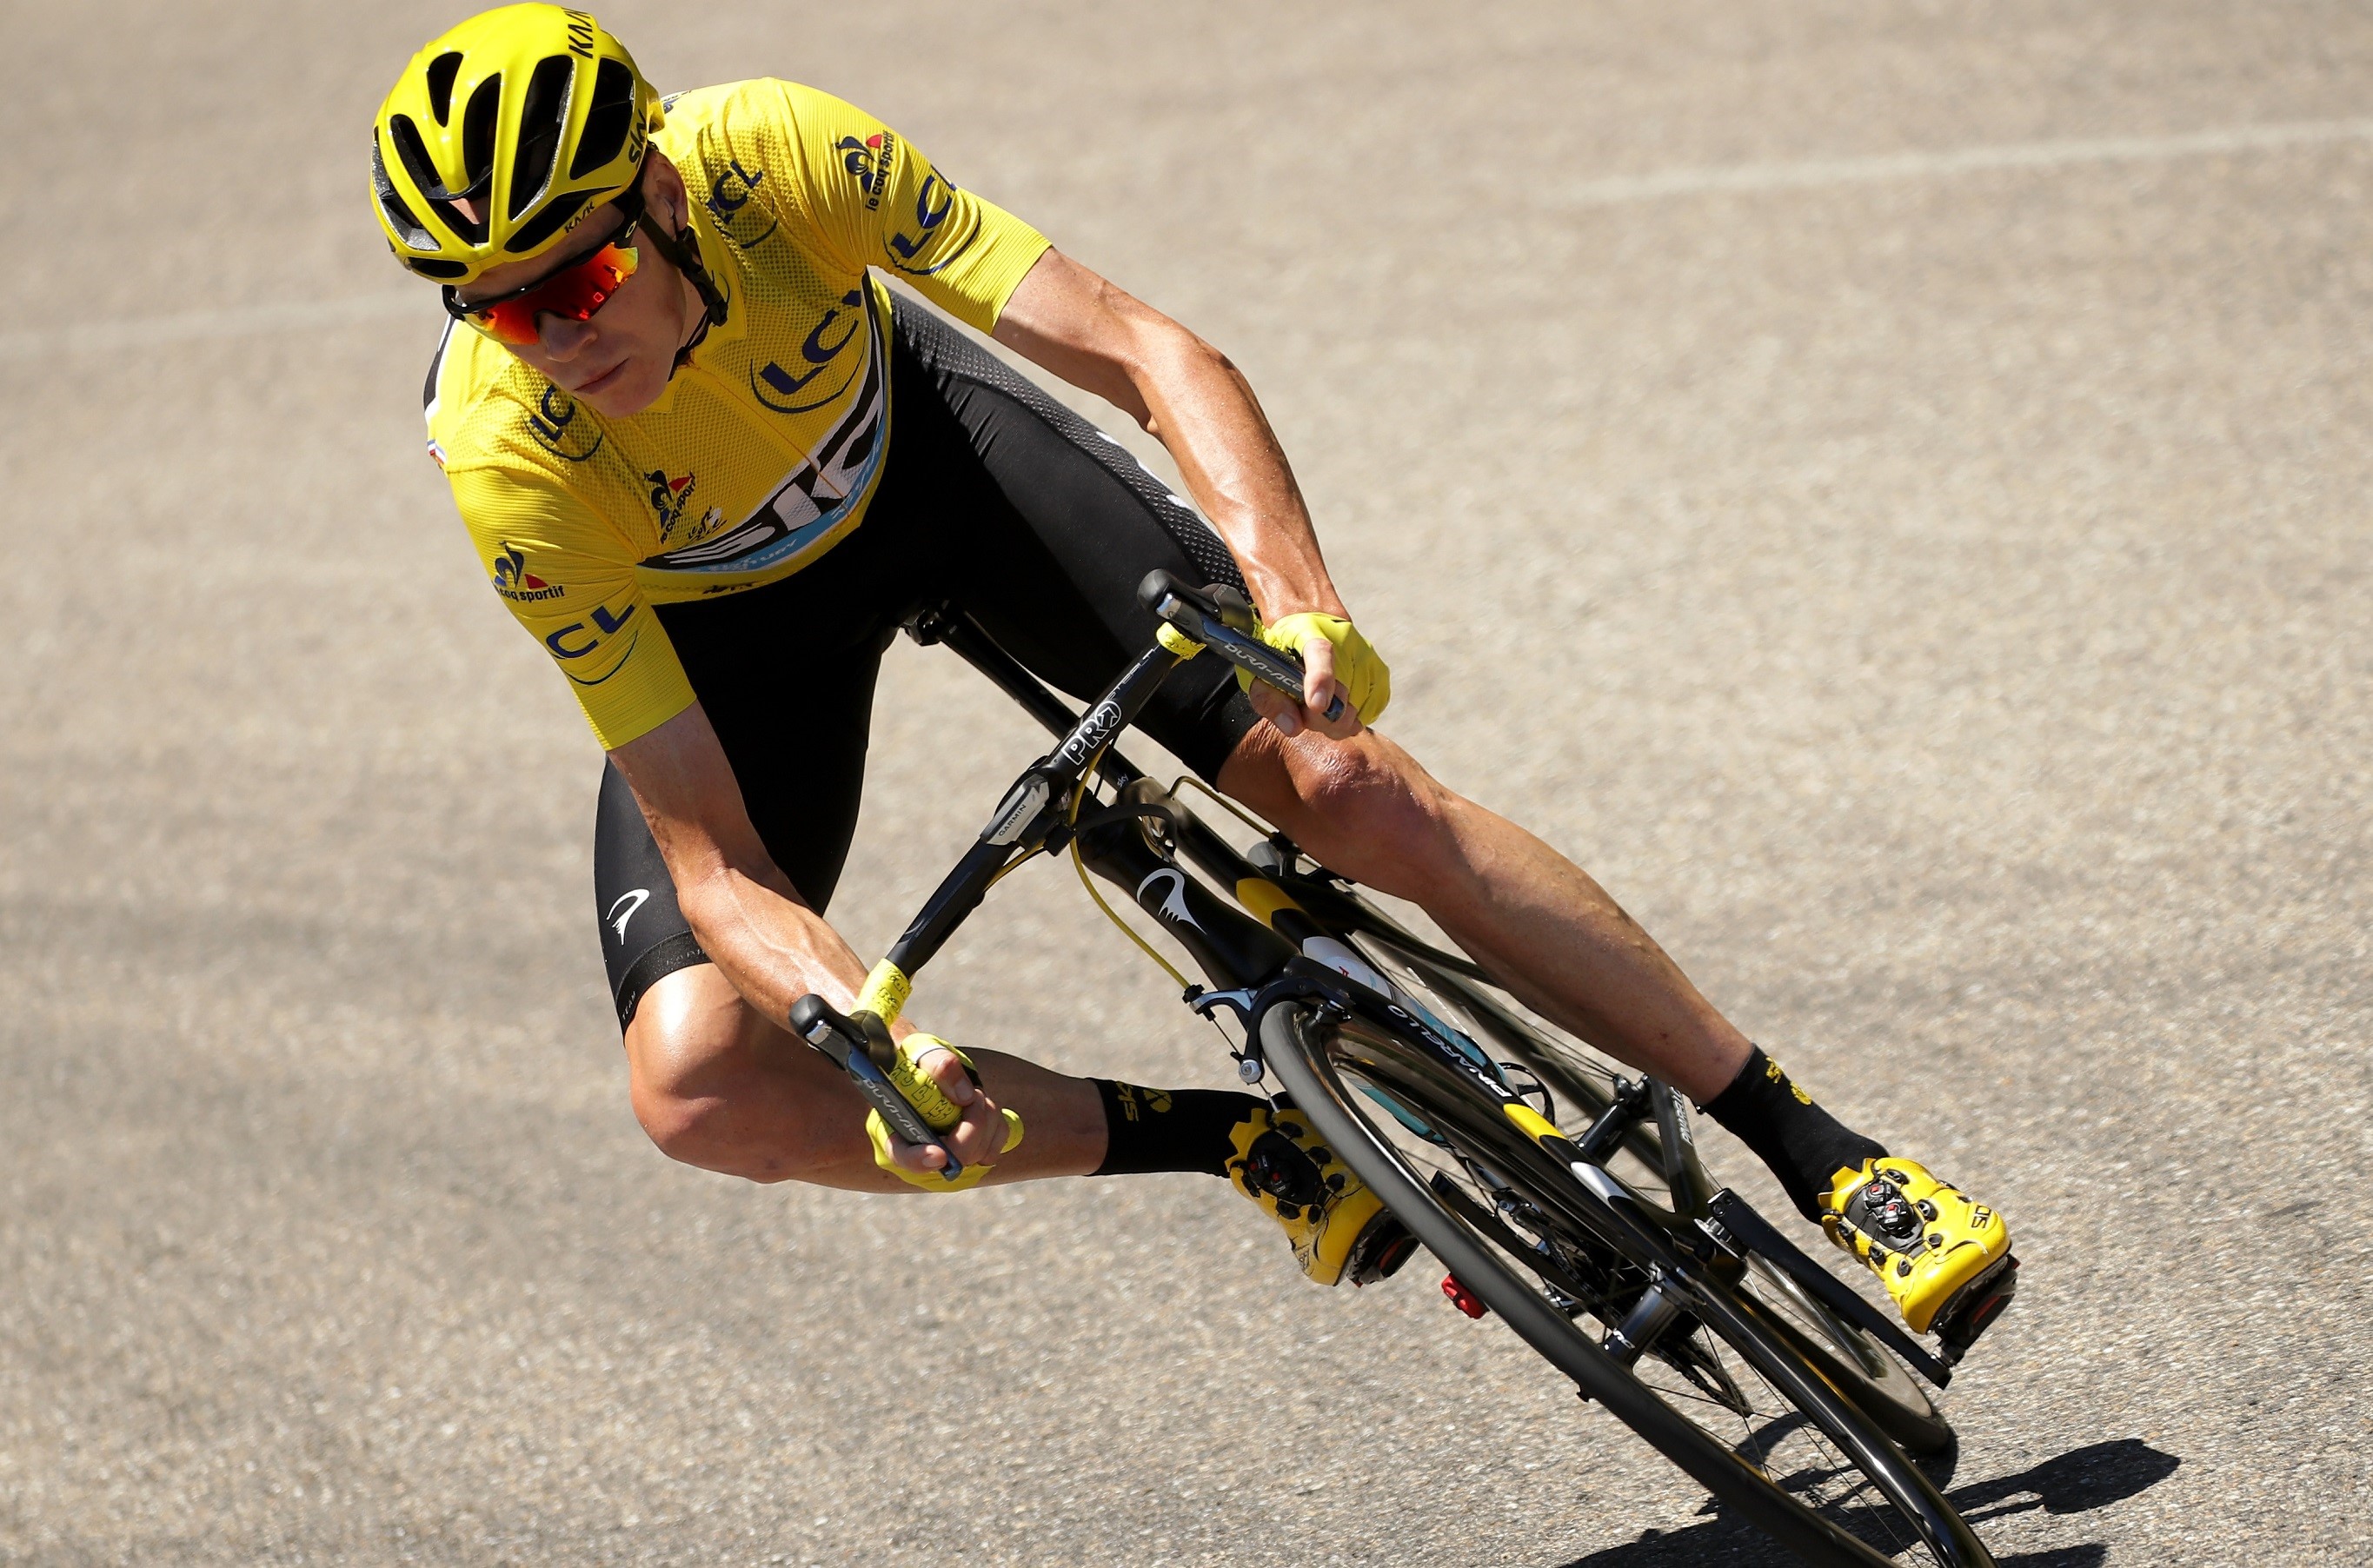 Chris Froome: One of the best in cycling with the yellow jersey